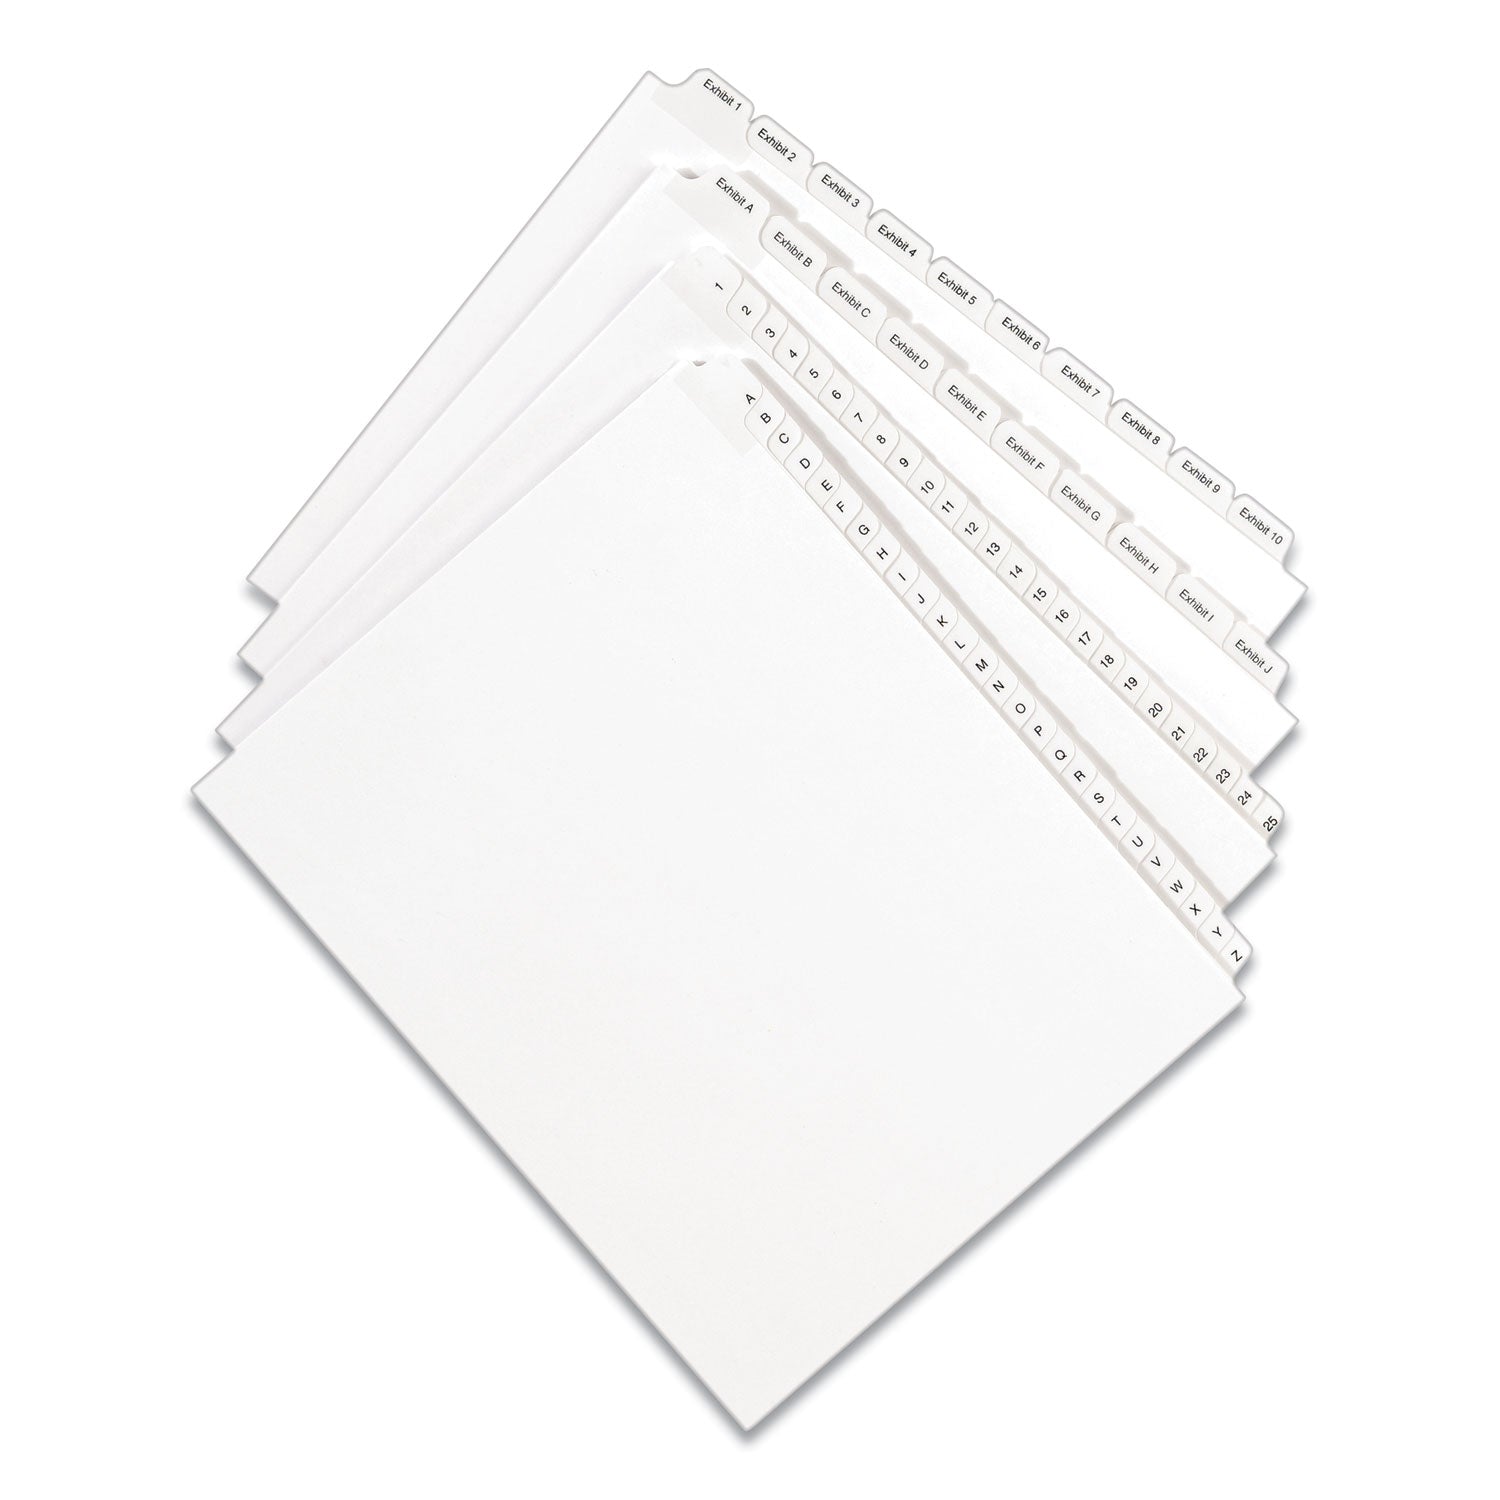 Preprinted Legal Exhibit Side Tab Index Dividers, Allstate Style, 26-Tab, Exhibit A to Exhibit Z, 11 x 8.5, White, 1 Set - 